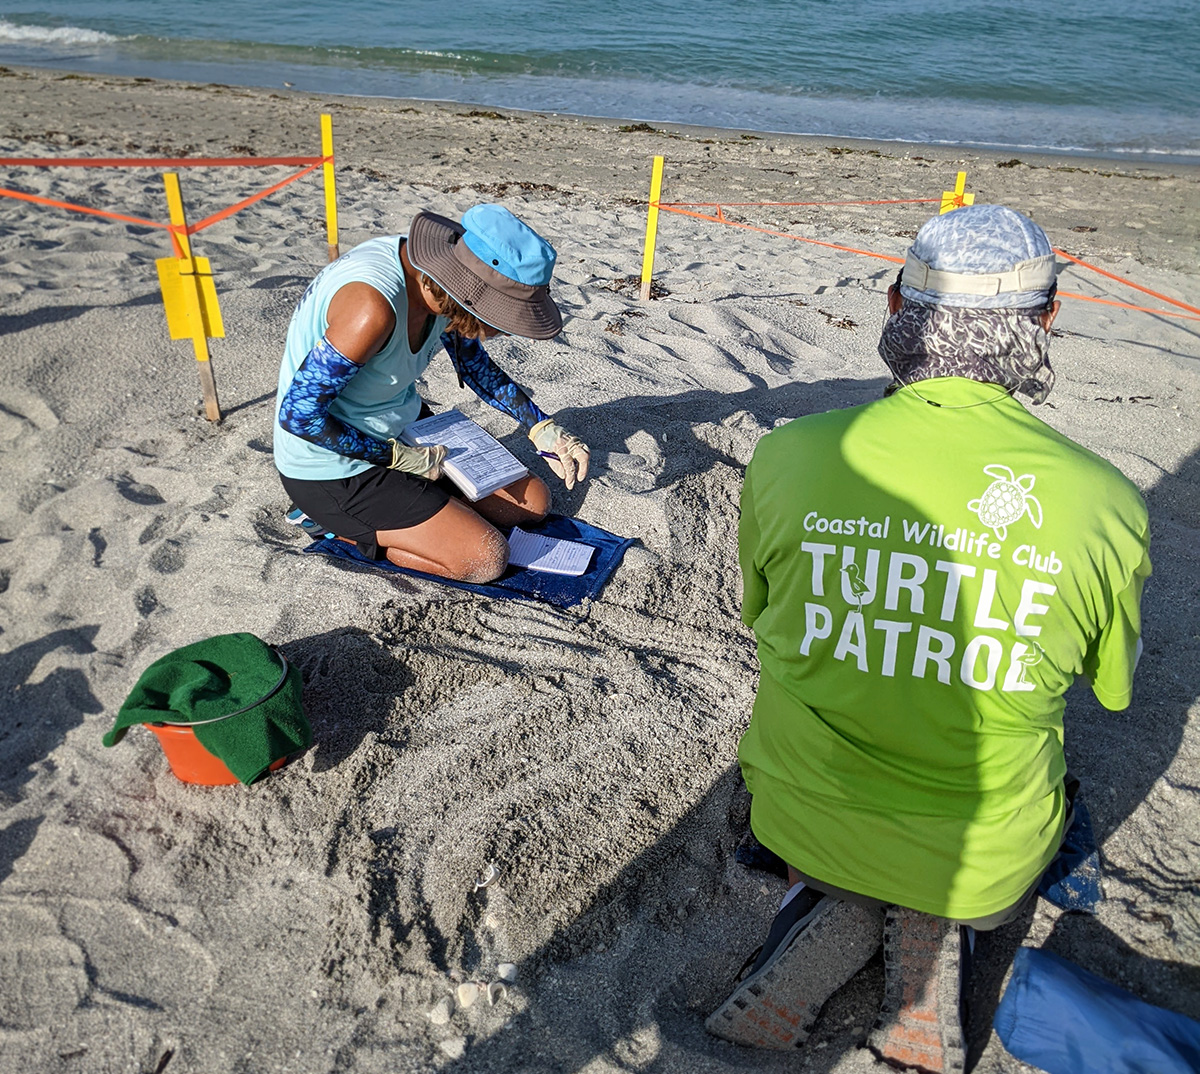 Two members of the Turtle Patrol at Manasota Key, Florida work on the beach on a turtle nest site.